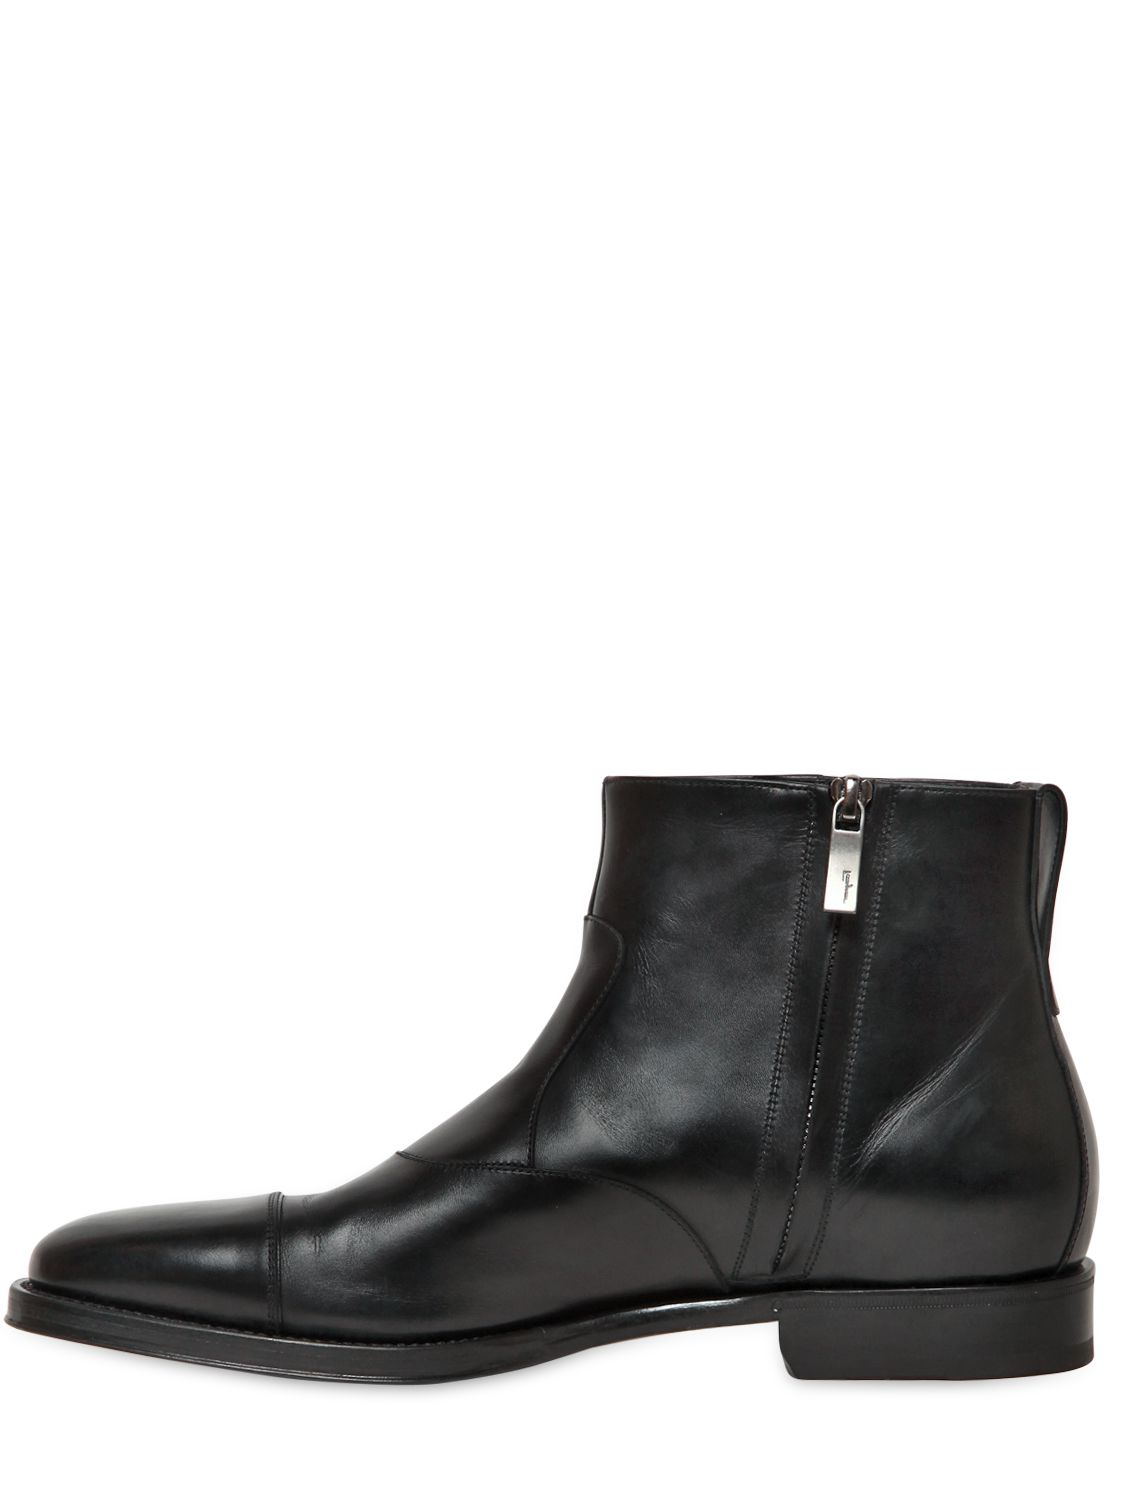 Lyst - Ferragamo Palace Leather Ankle Boots in Black for Men